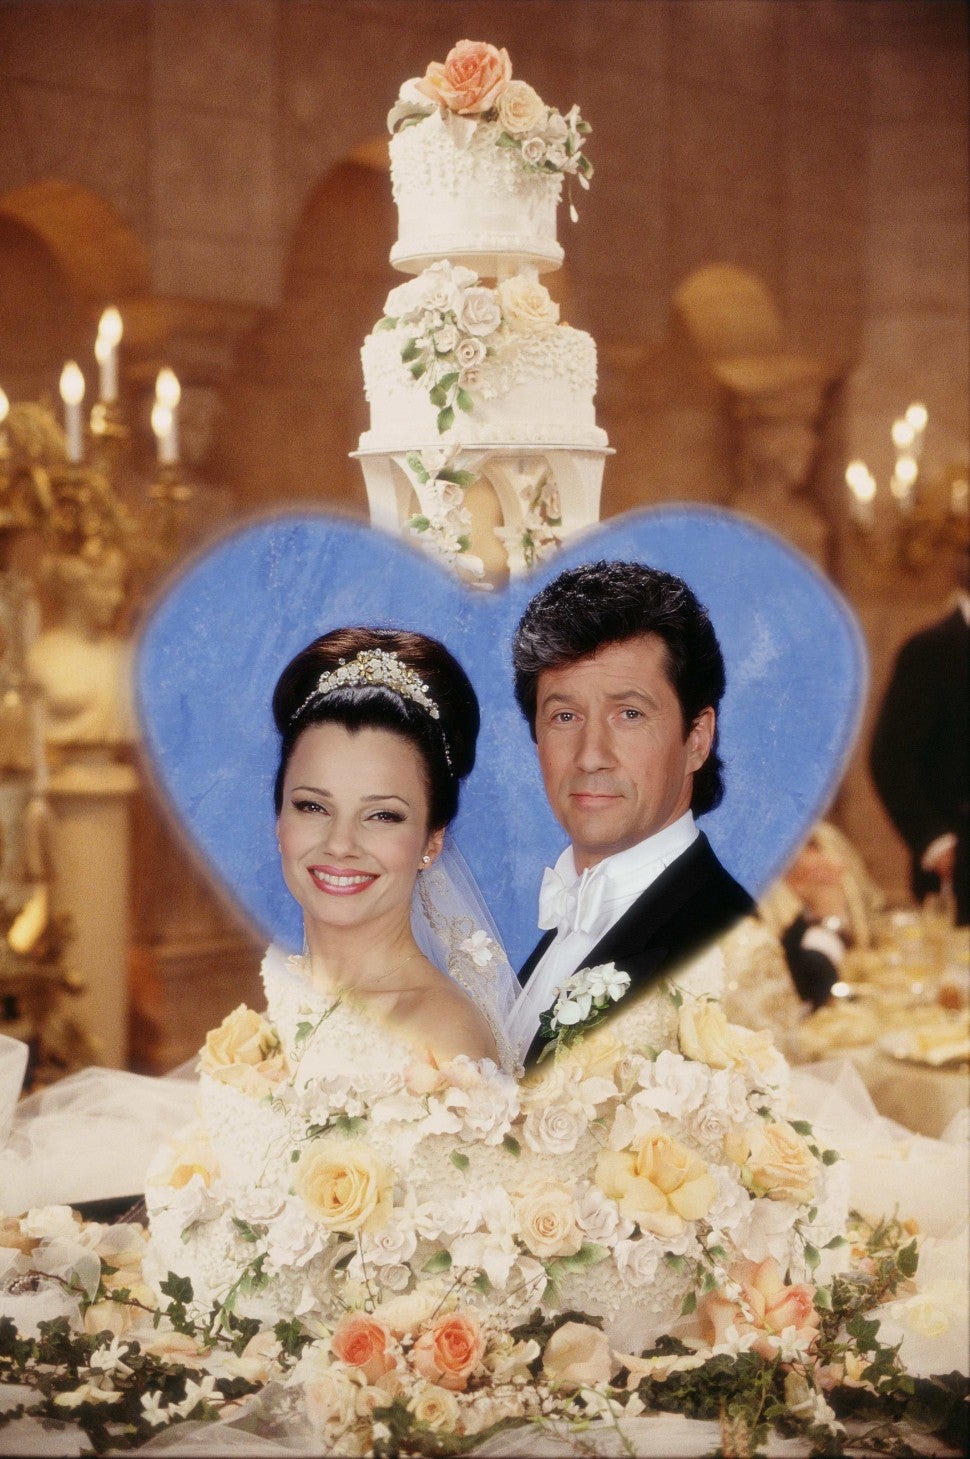 Fran Drescher and Charles Shaugnessy vignetted in a photo of the wedding cake from THE NANNY episode where their characters were marriedFran Drescher and Charles Shaugnessy vignetted in a photo of the wedding cake from THE NANNY episode where their characters were married